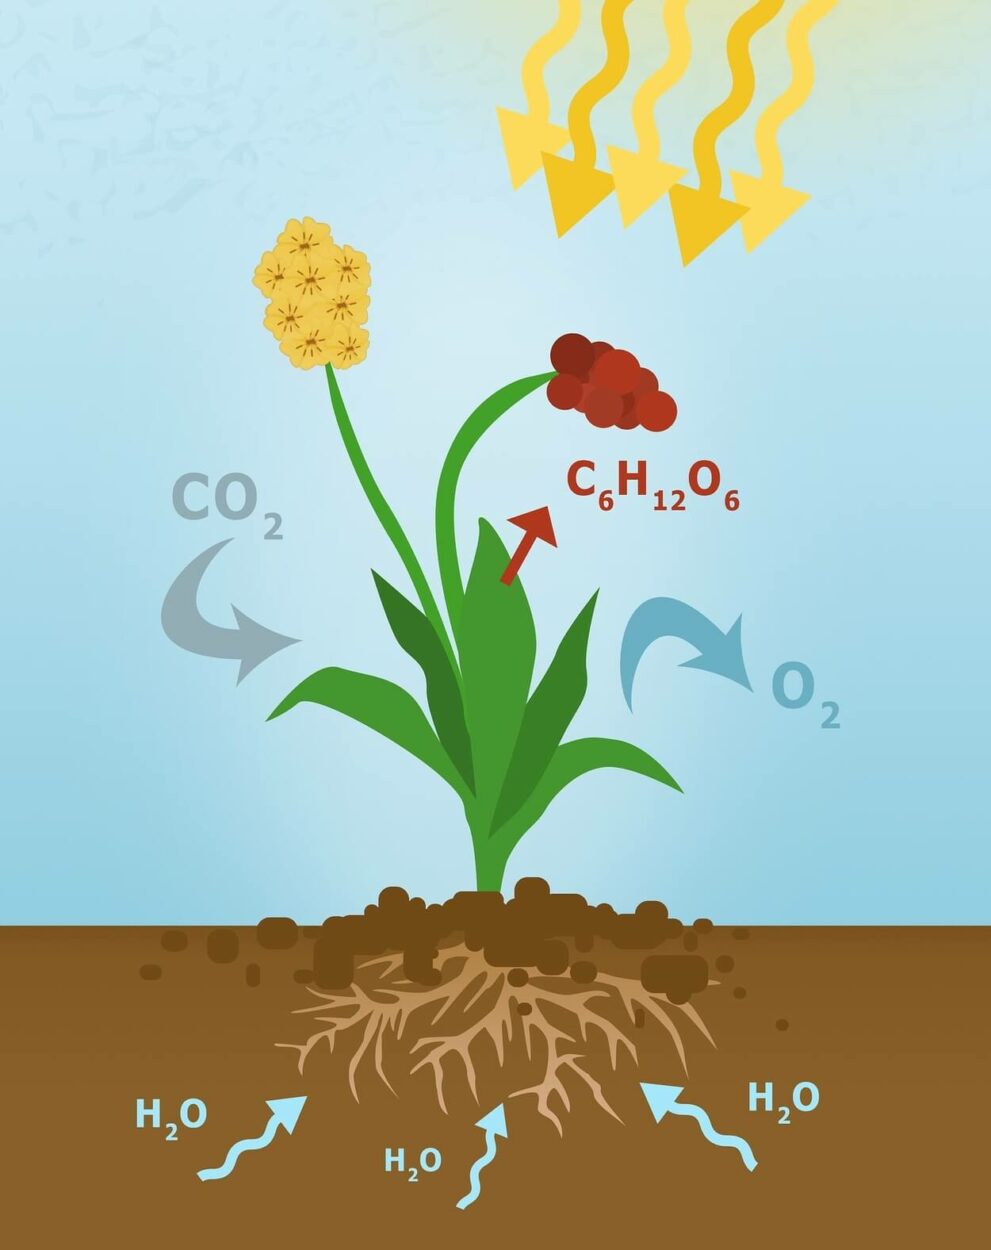 Process of photosynthesis.